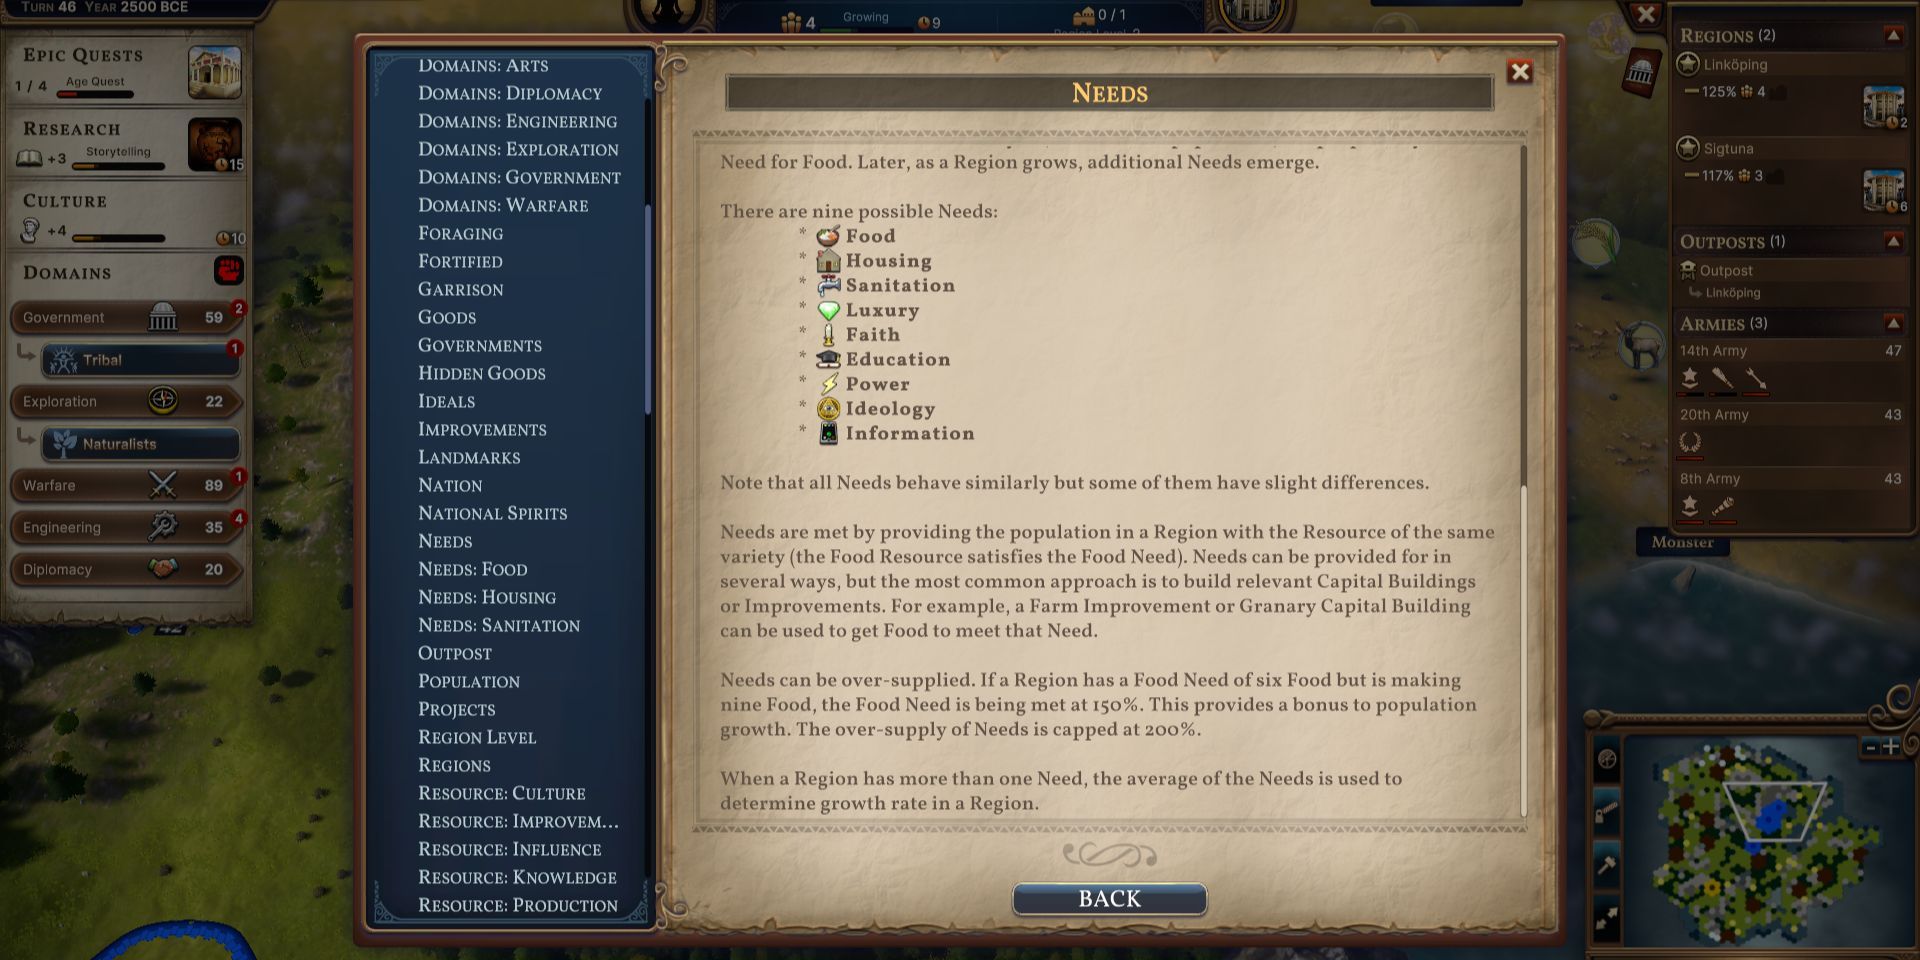 the in-game ecnyclopedia page about needs from Millennia